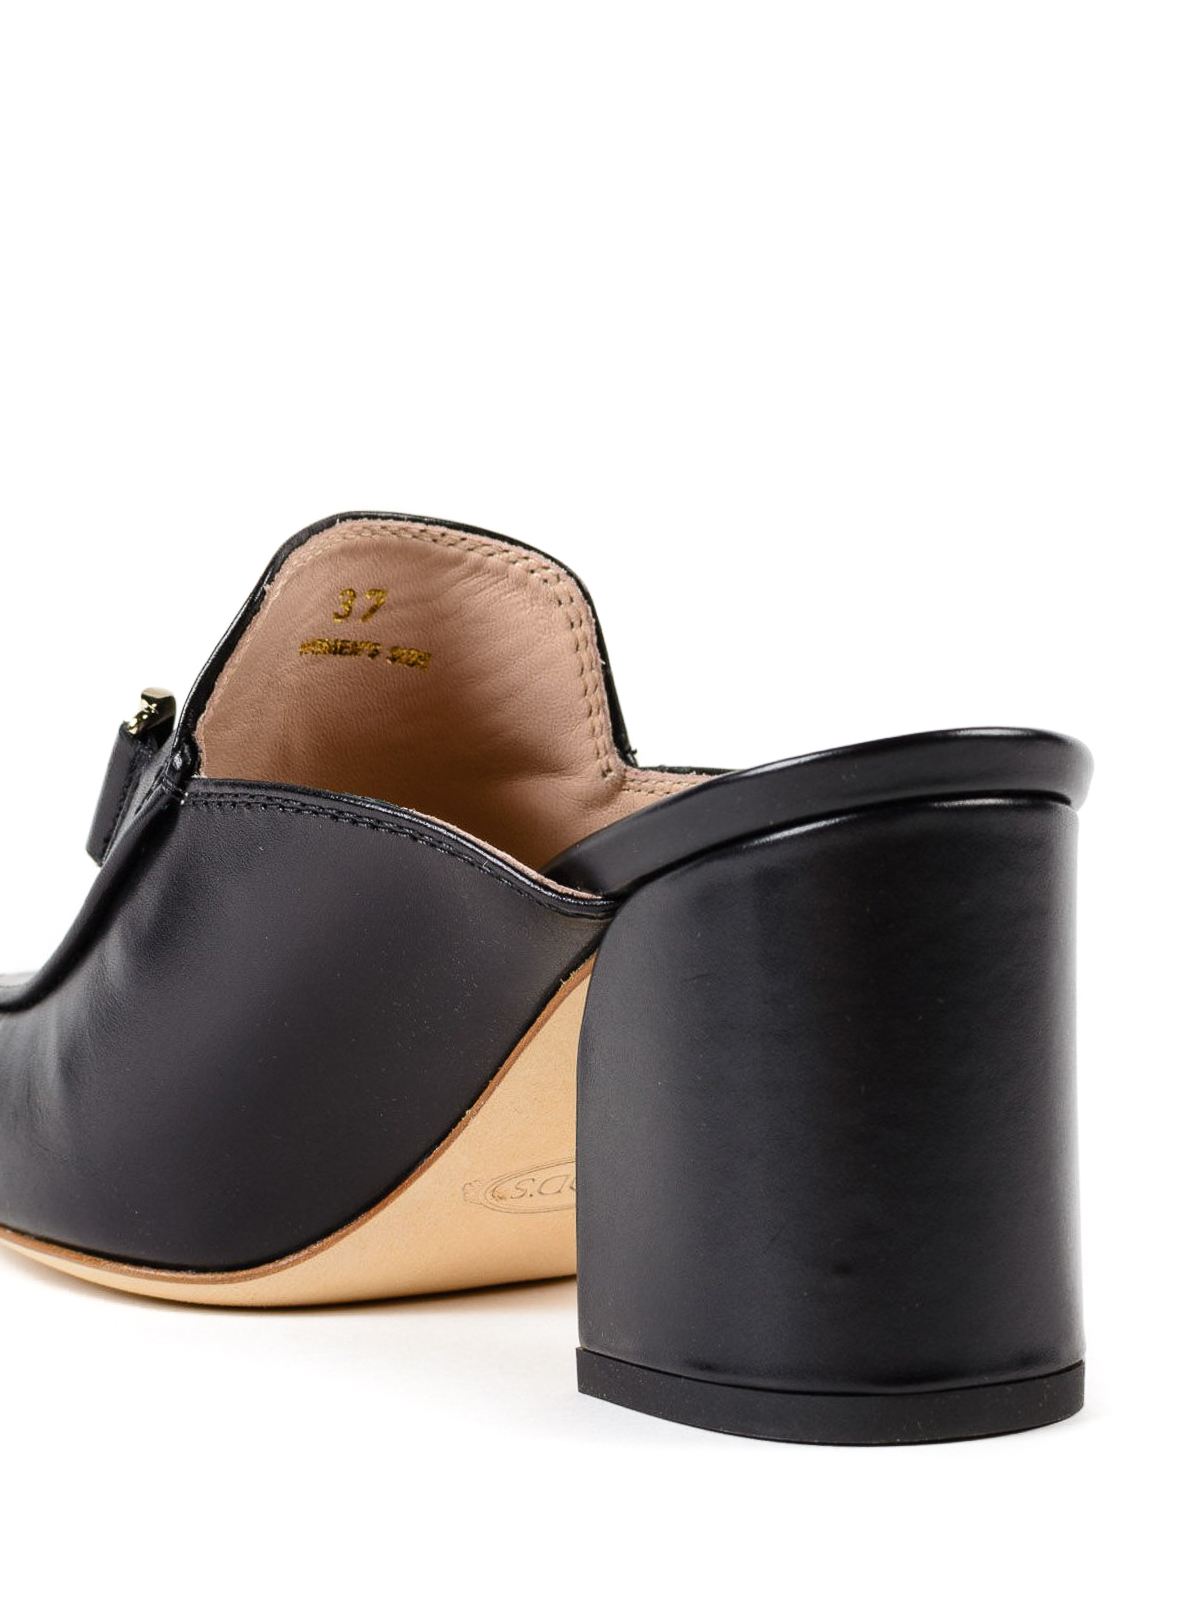 tod's mules in leather